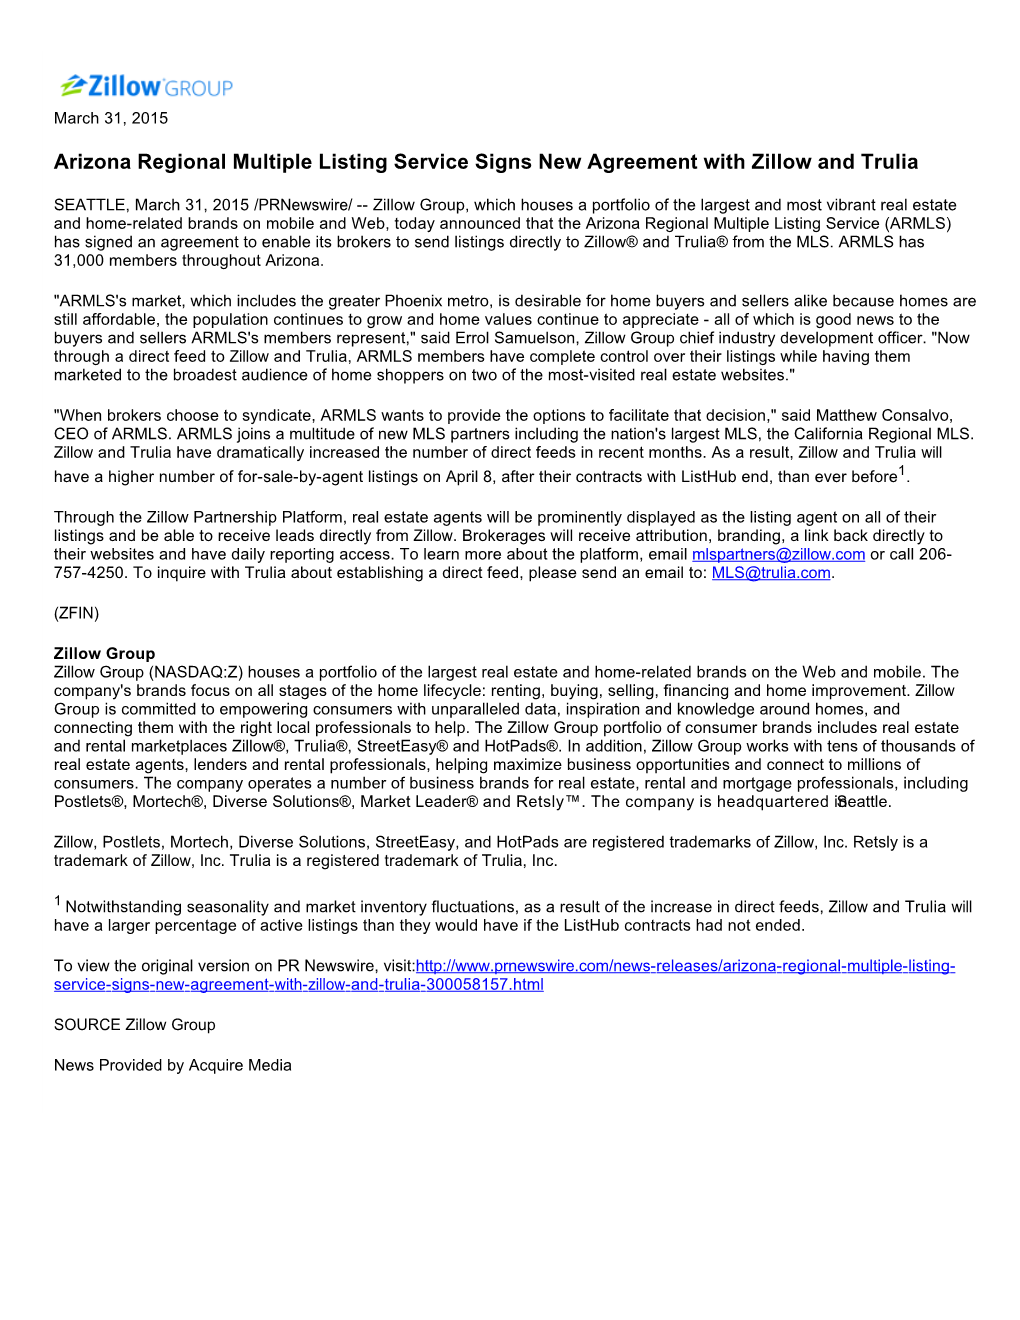 Arizona Regional Multiple Listing Service Signs New Agreement with Zillow and Trulia